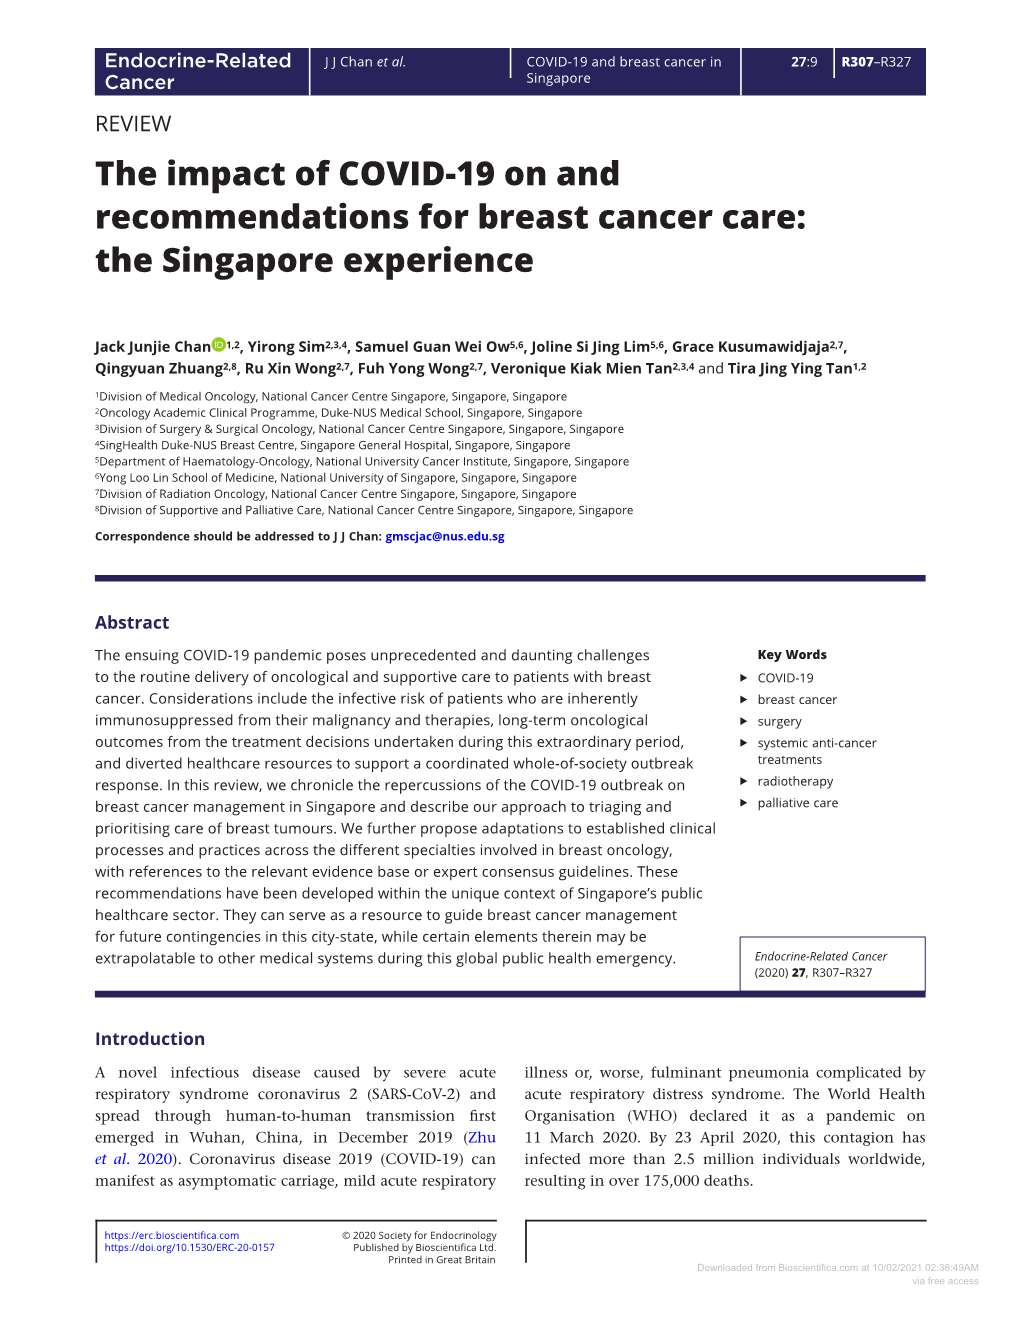 The Impact of COVID-19 on and Recommendations for Breast Cancer Care: the Singapore Experience